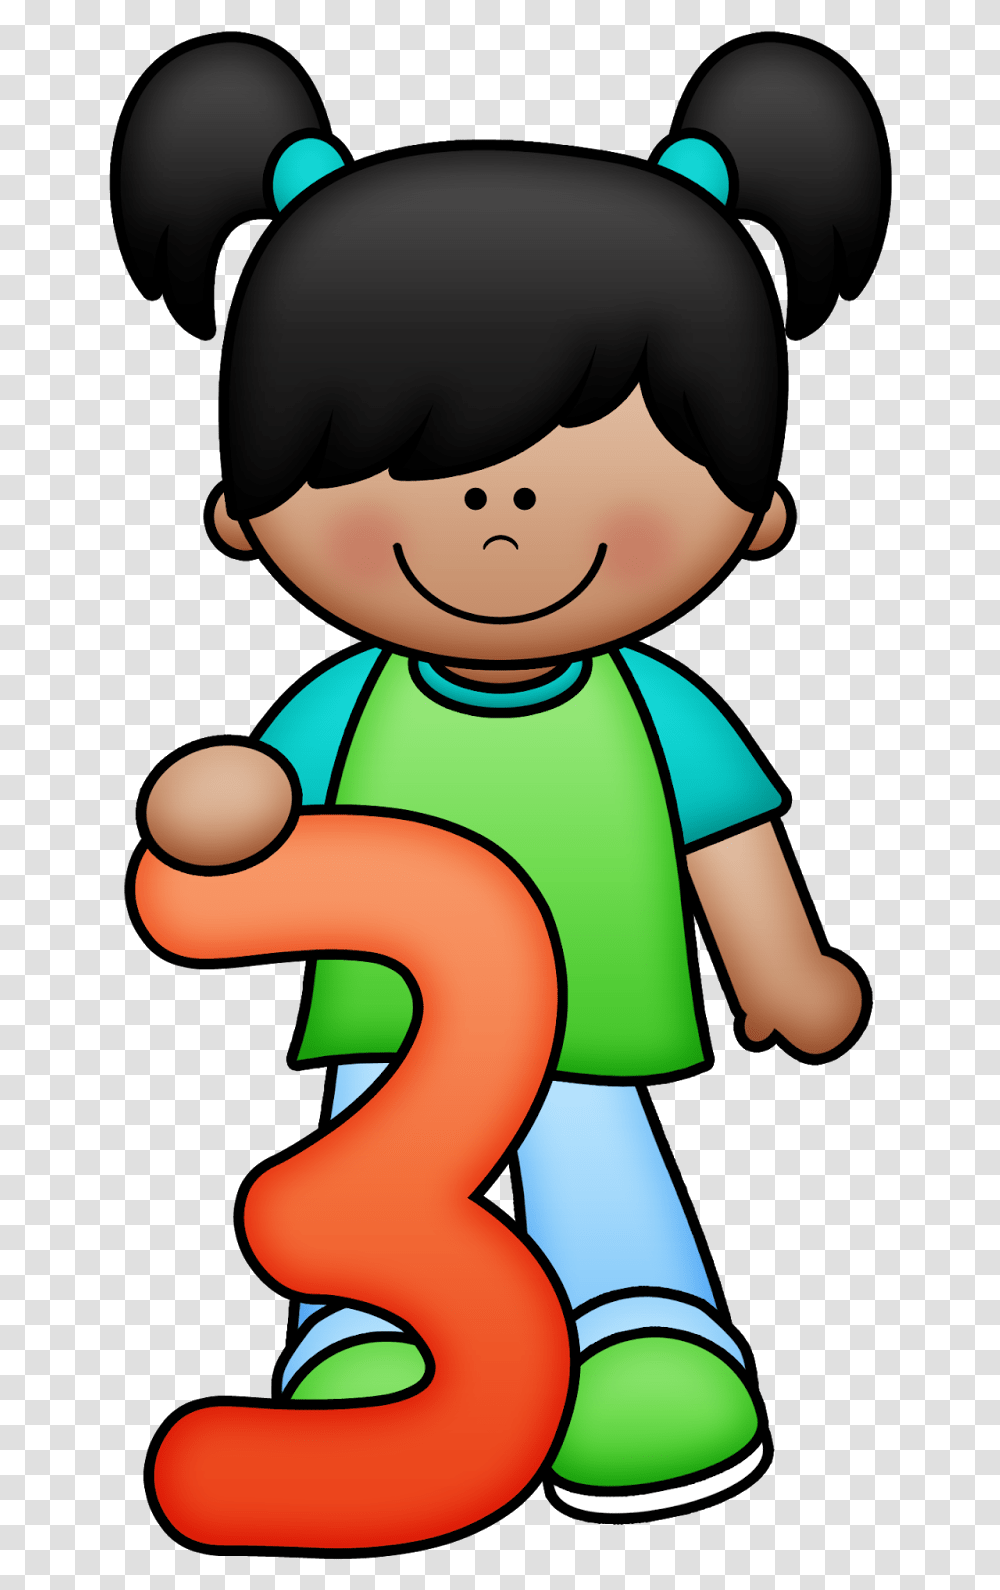 Numeros Kinder Ideas Past Form Of Celebrate, Toy, Room, Indoors, Food Transparent Png